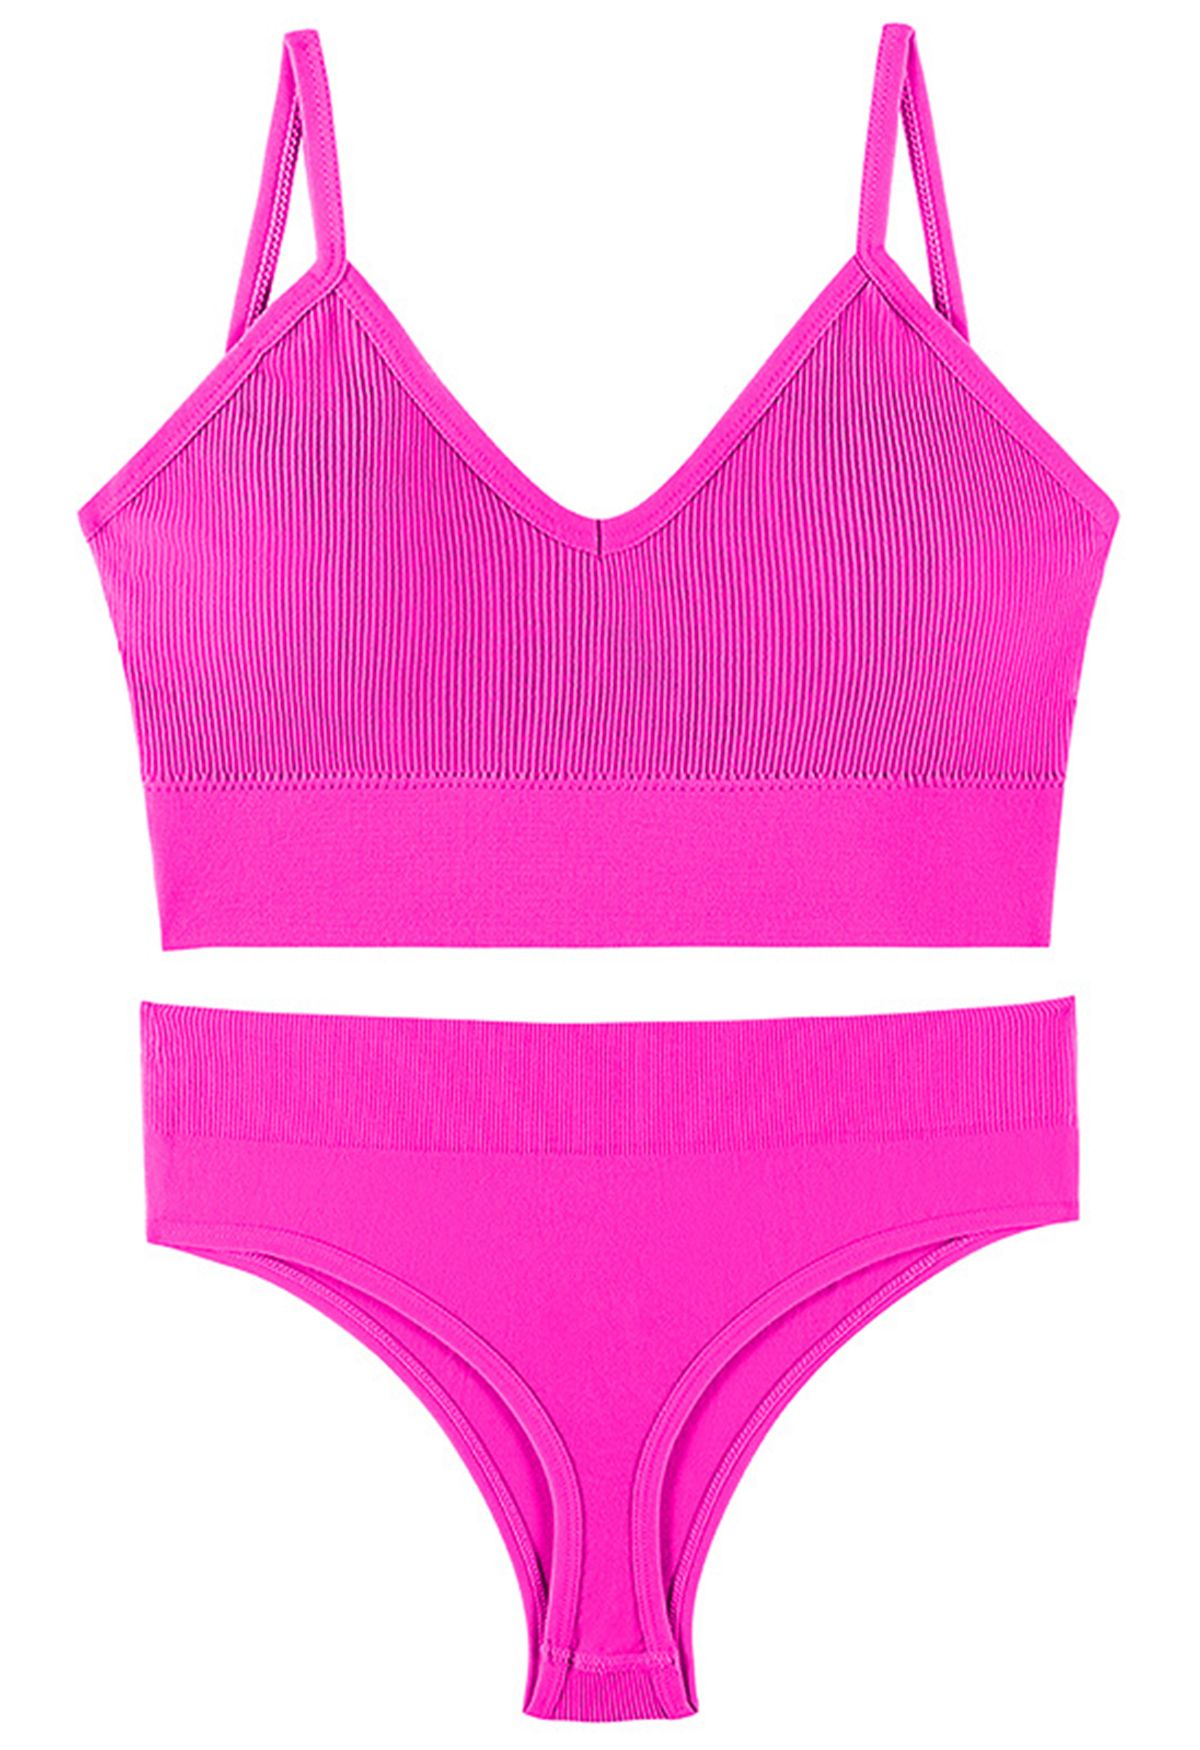 Plain Ribbed Lingerie Bra Top and Thong Set in Hot Pink